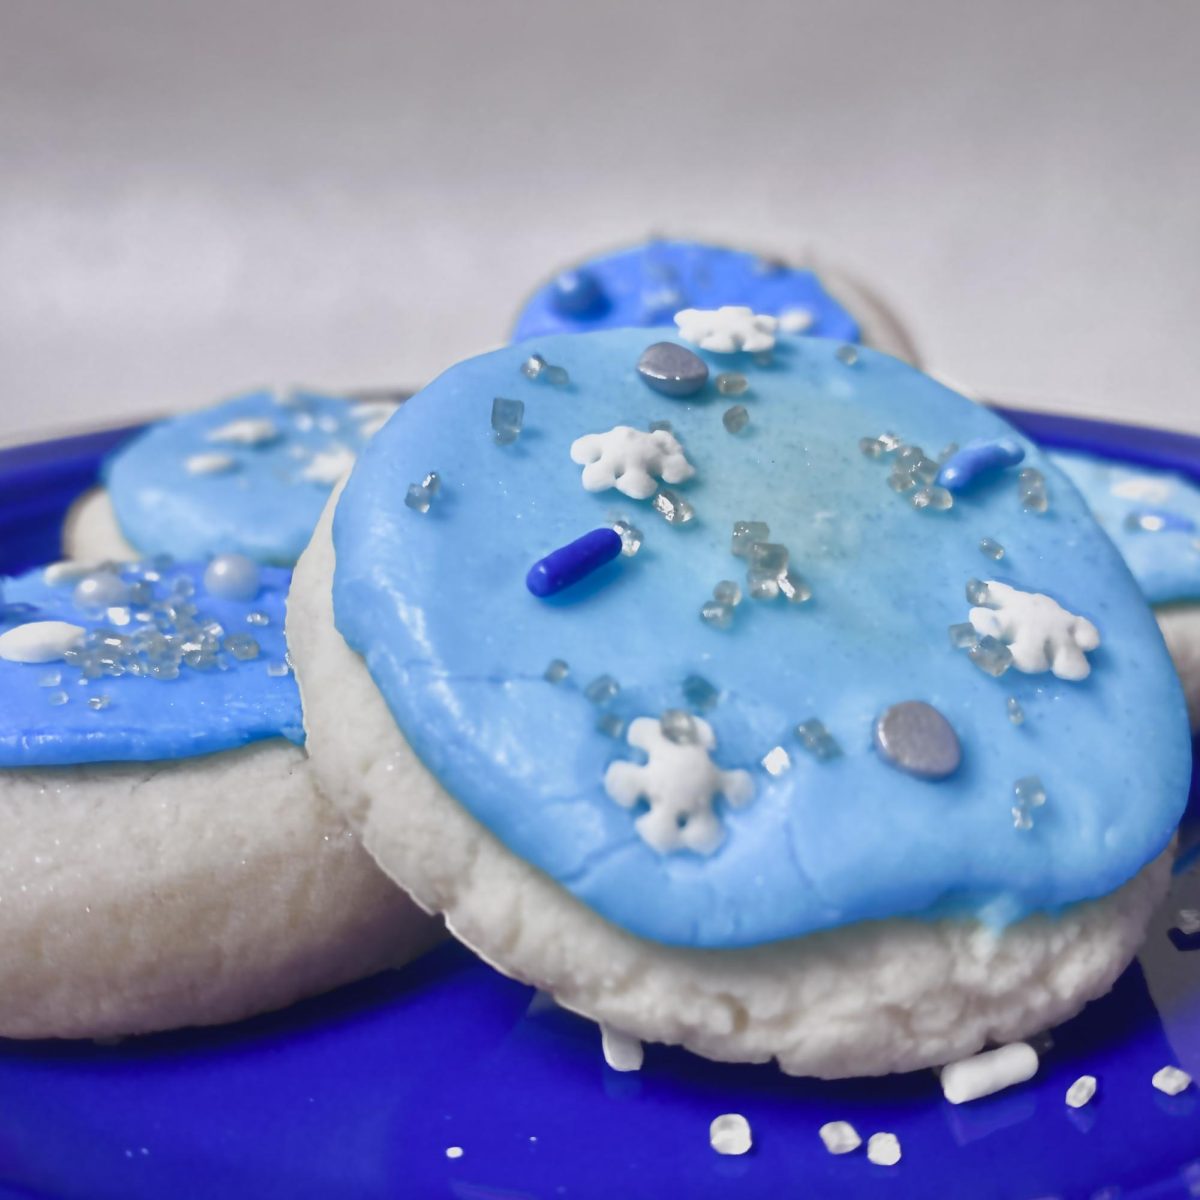 I made mine winter-themed, but this recipe can be used for any occasion!